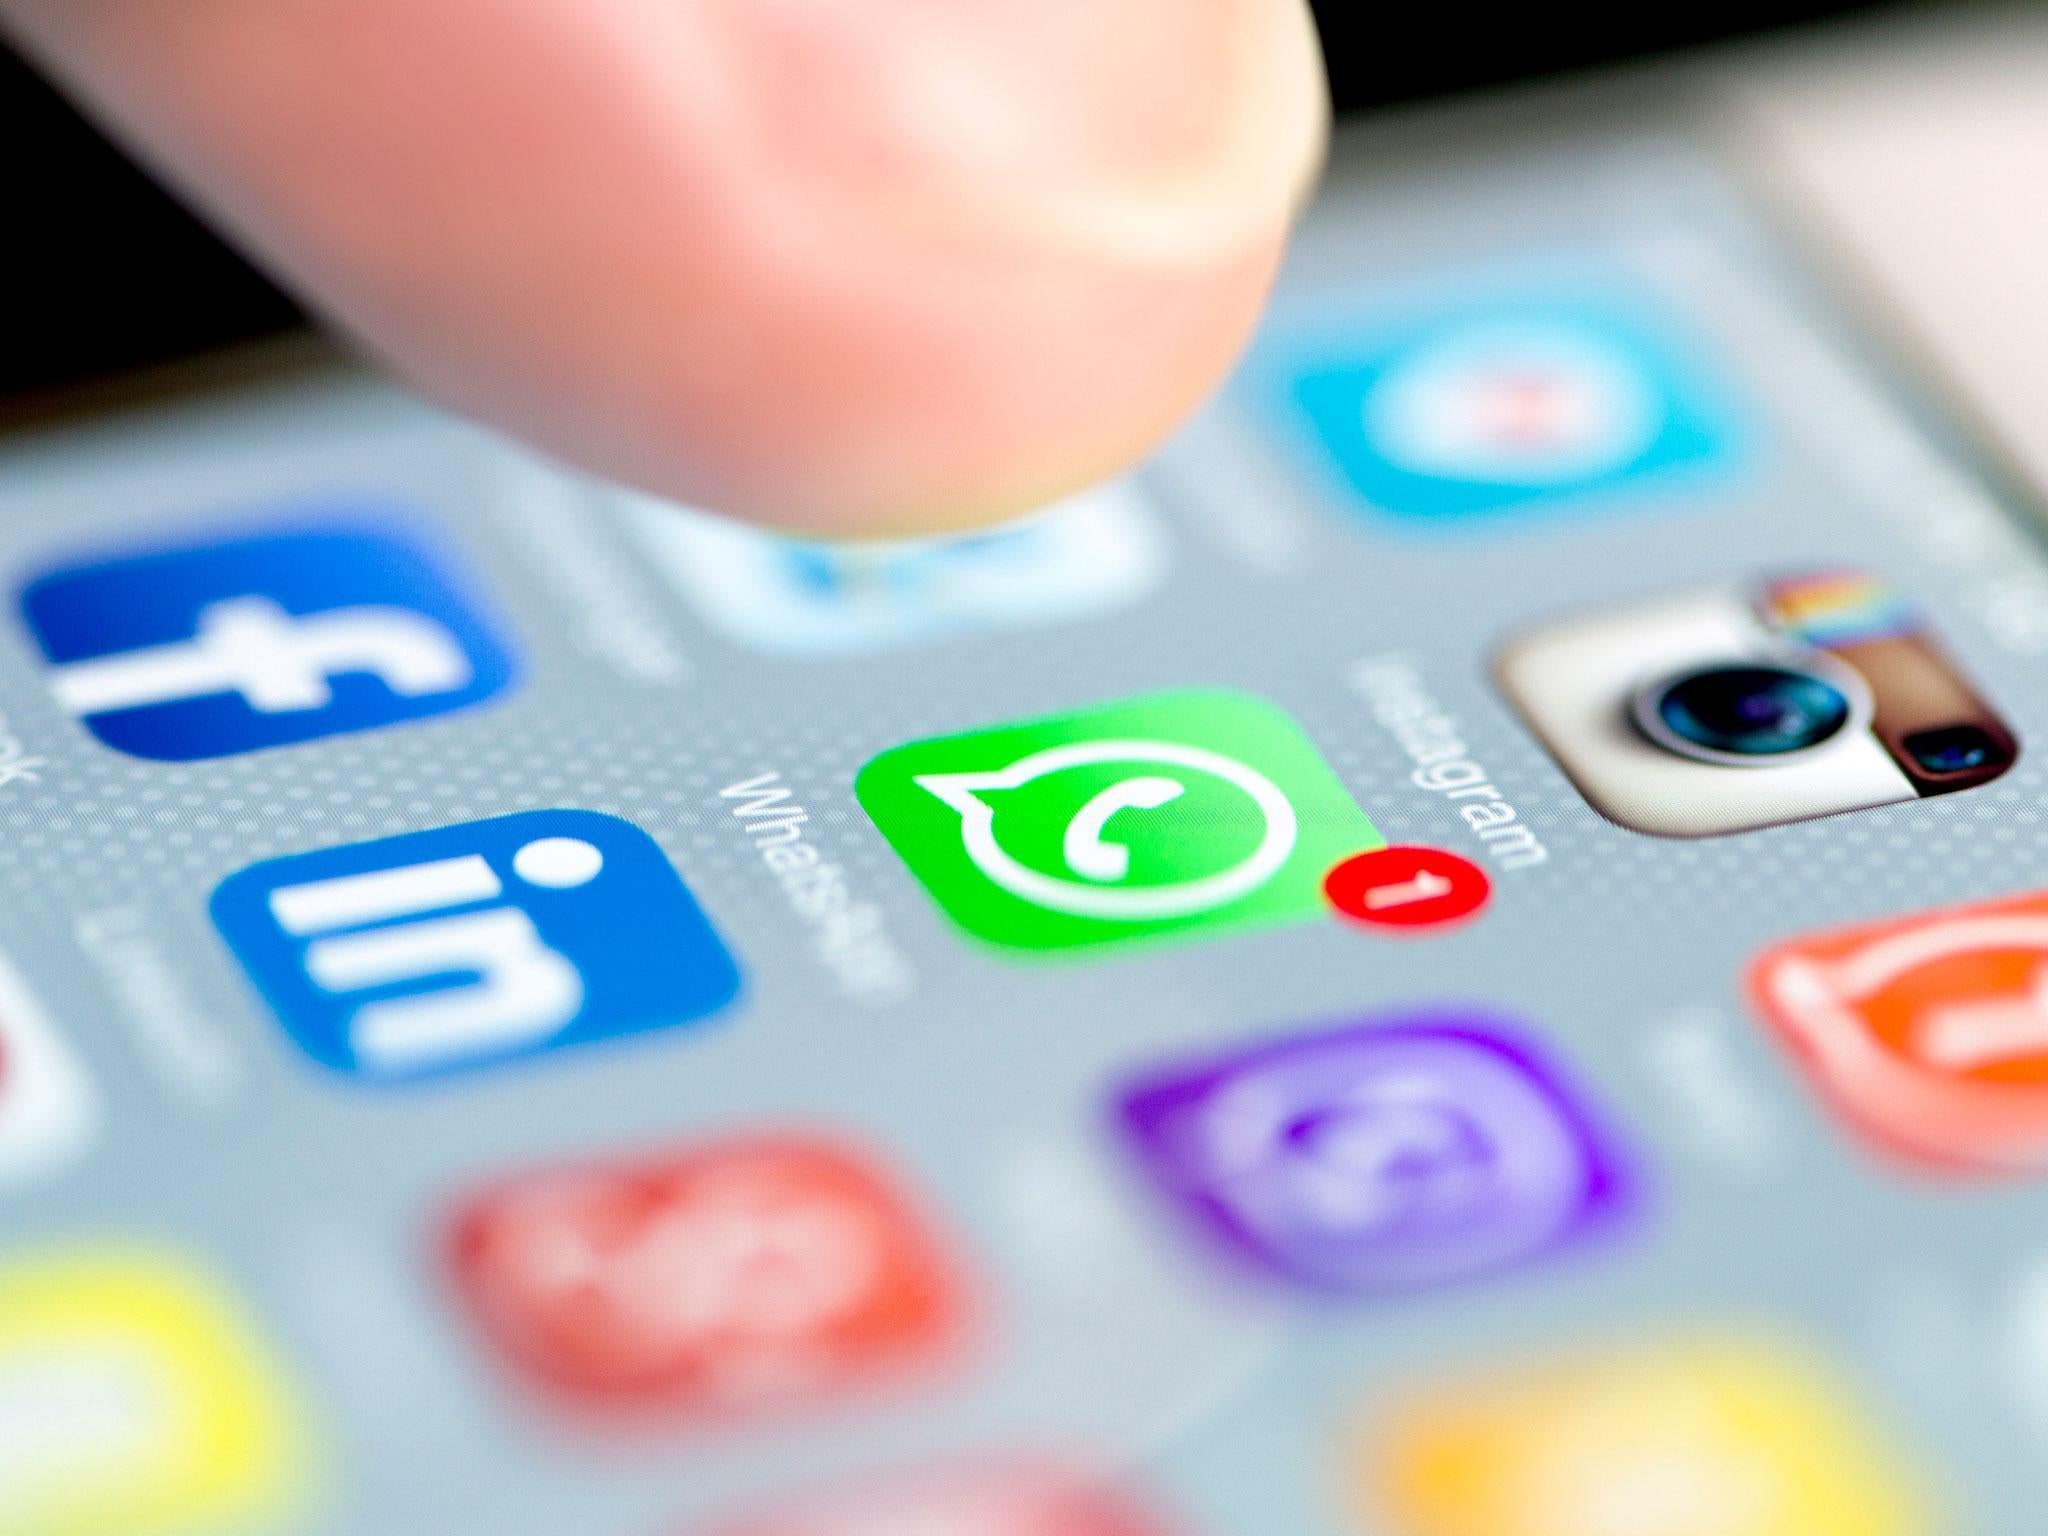 WhatsApp is also believed to be considering bringing back the old Contacts list